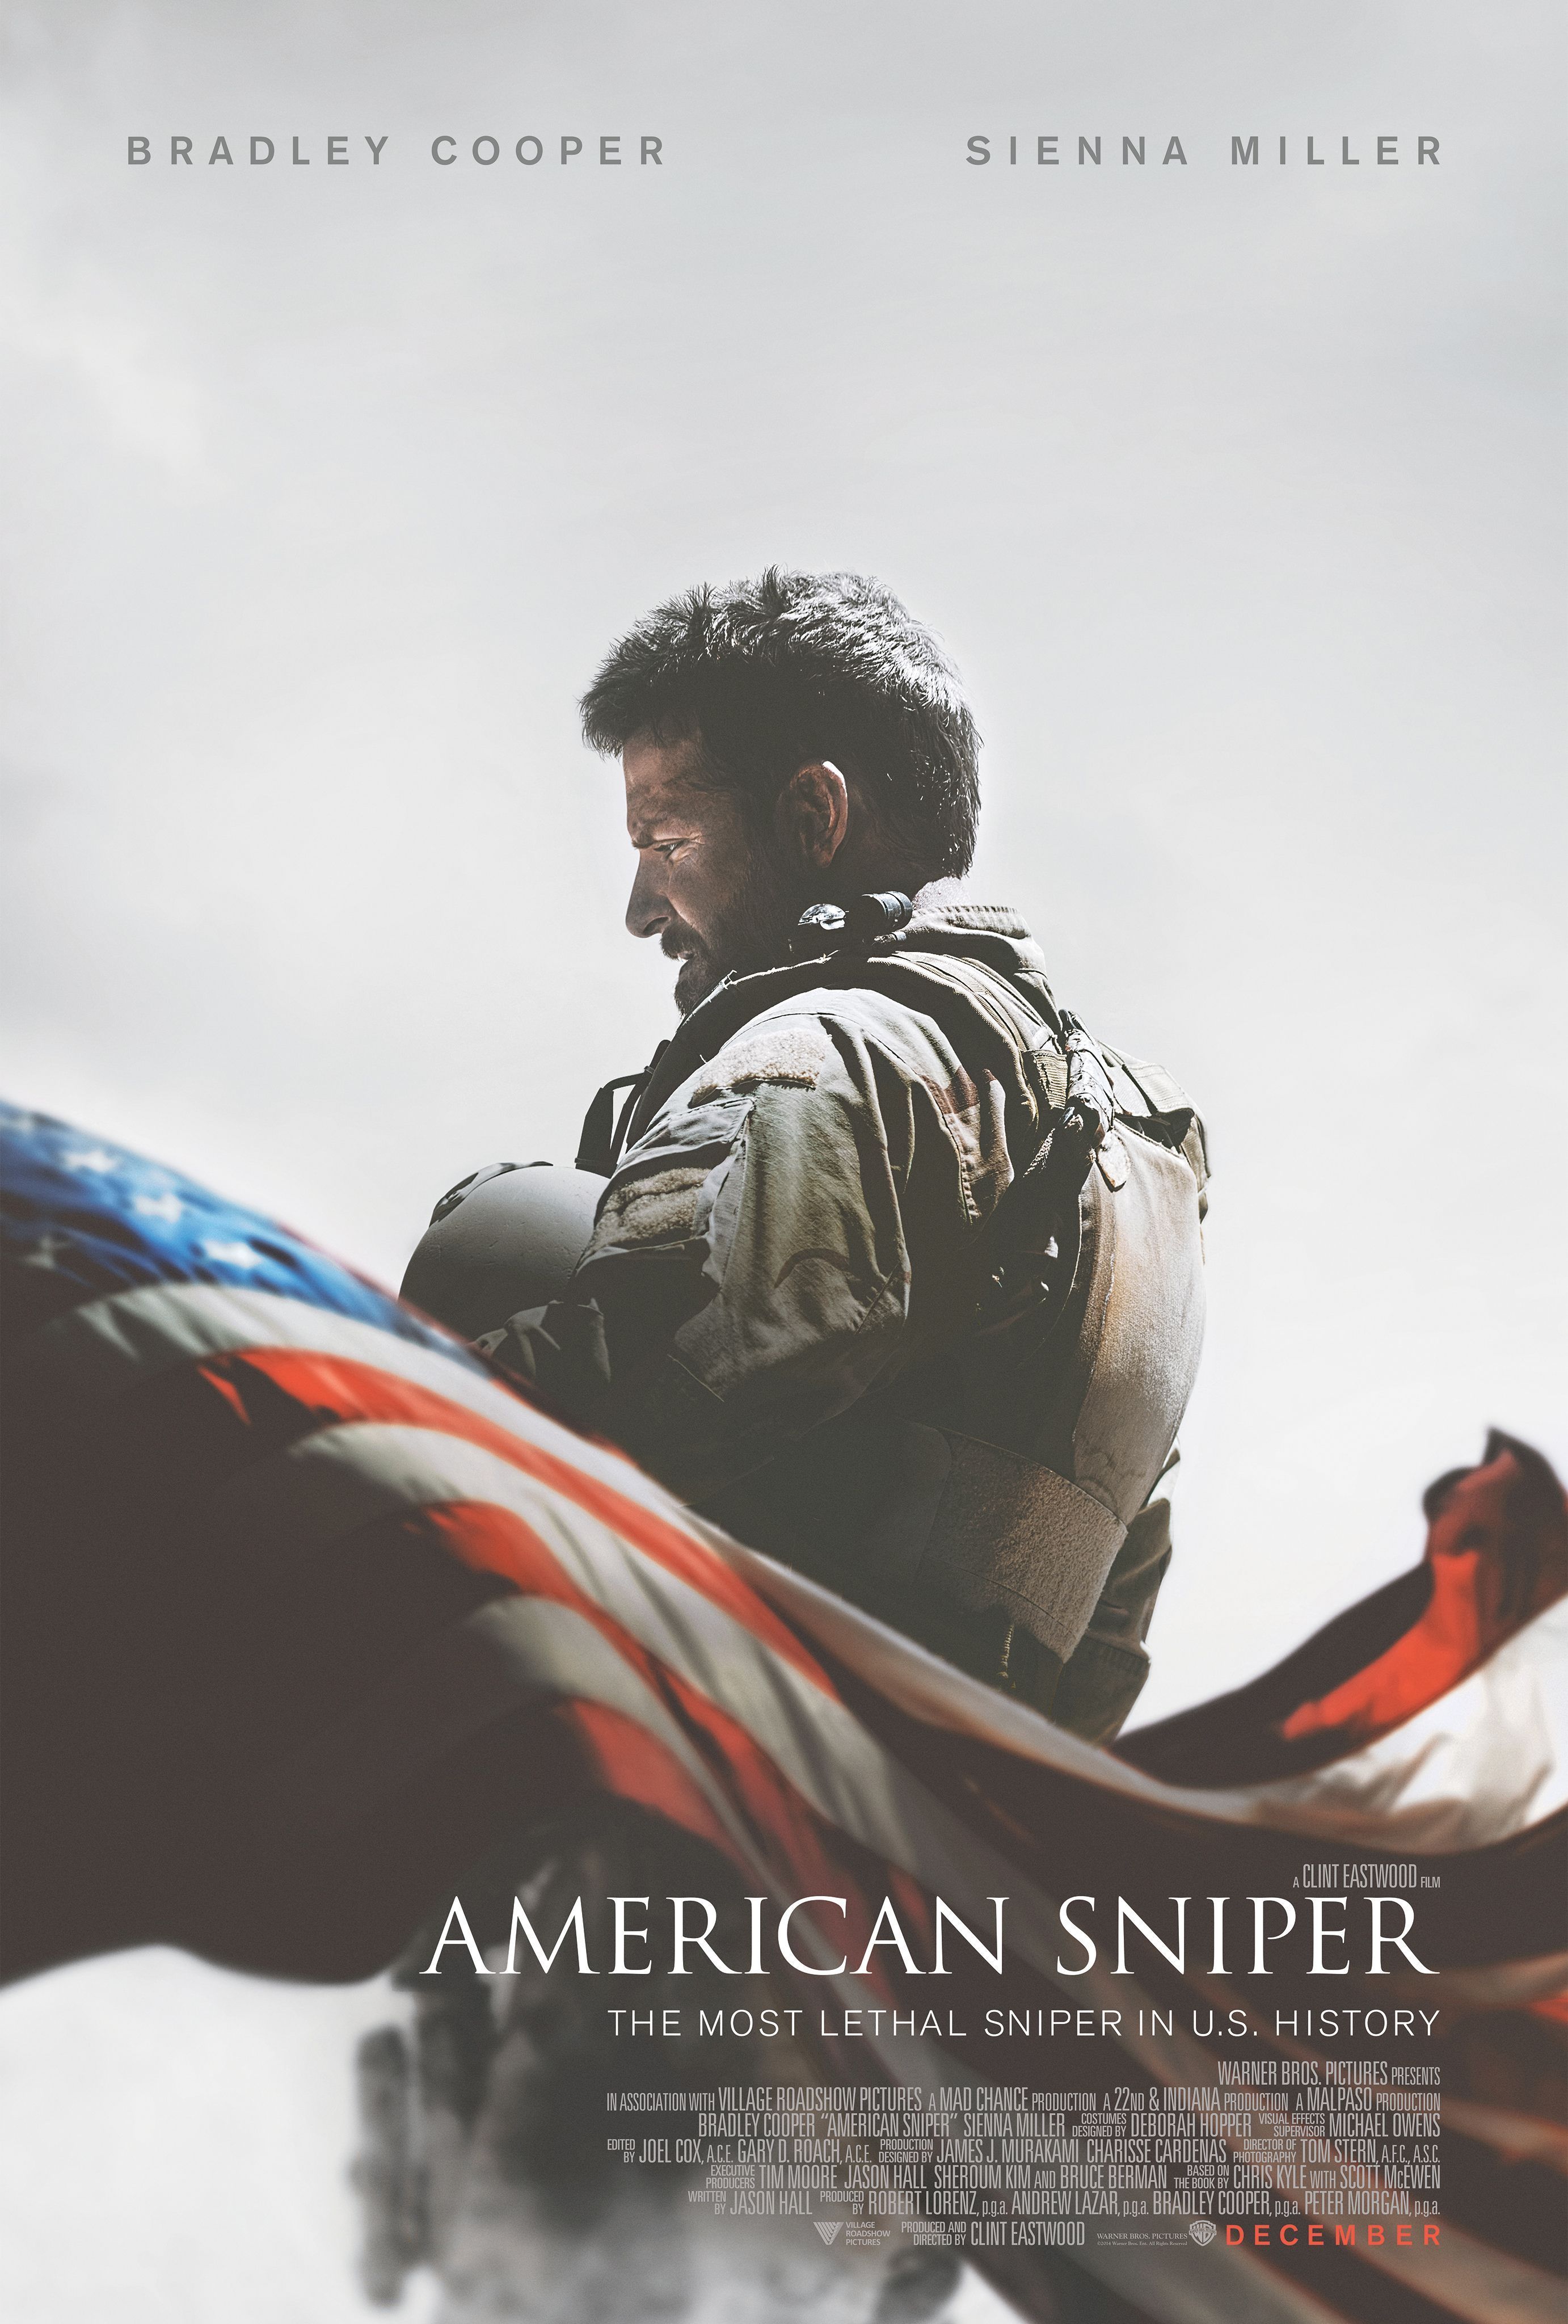 The Trauma Hero: From Wilfred Owen to “Redeployment” and “American Sniper”